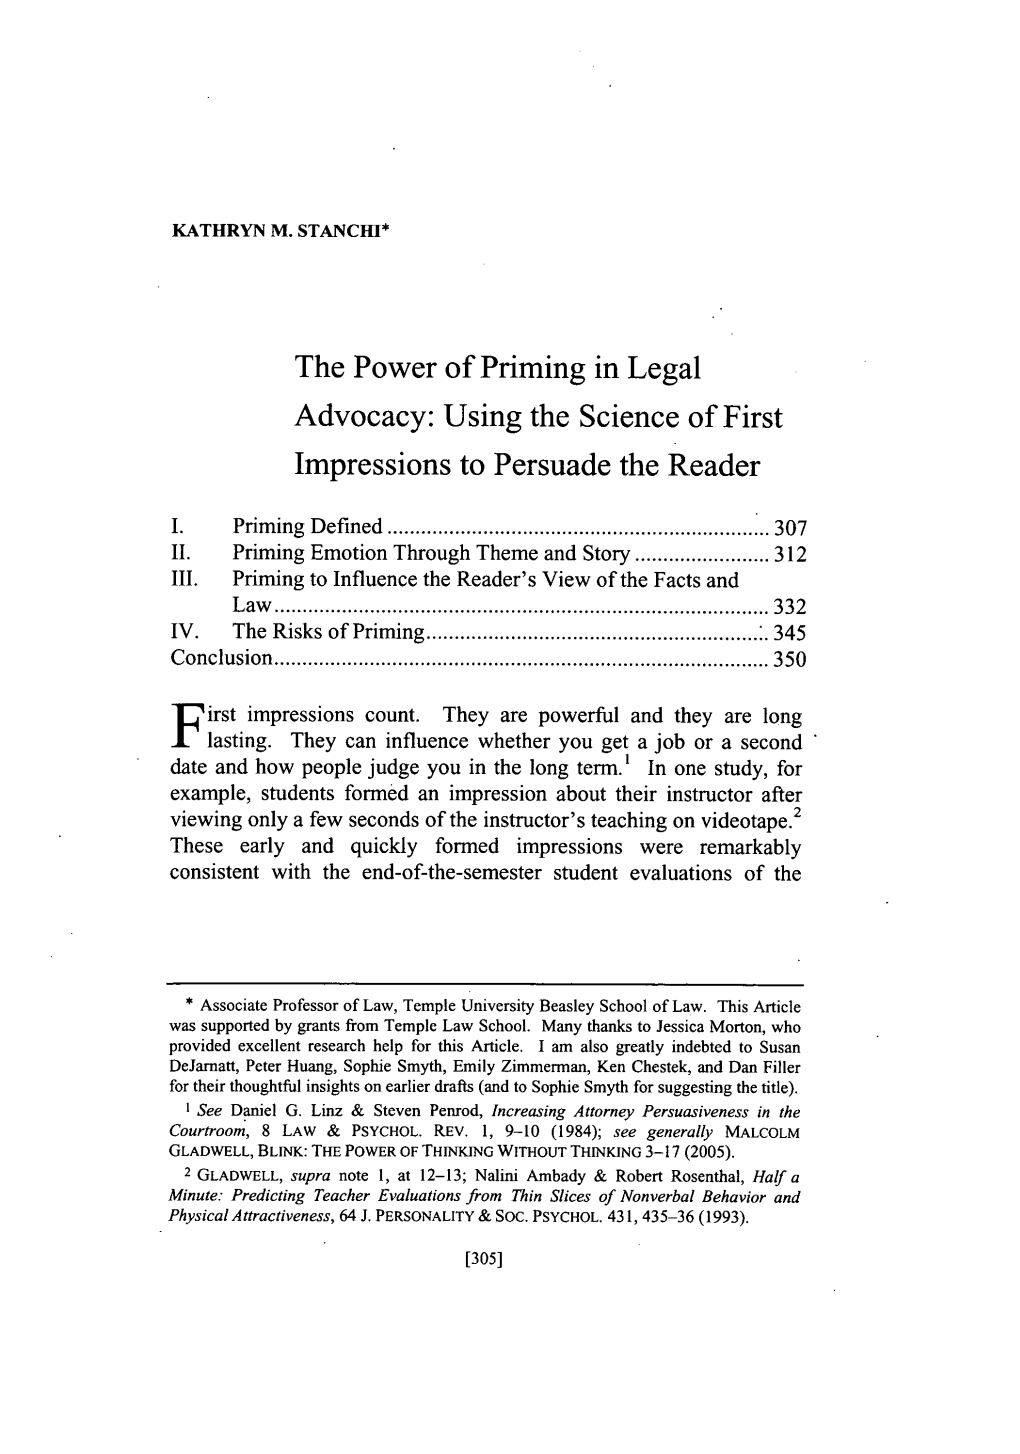 The Power of Priming in Legal Advocacy: Using the Science of First Impressions to Persuade the Reader